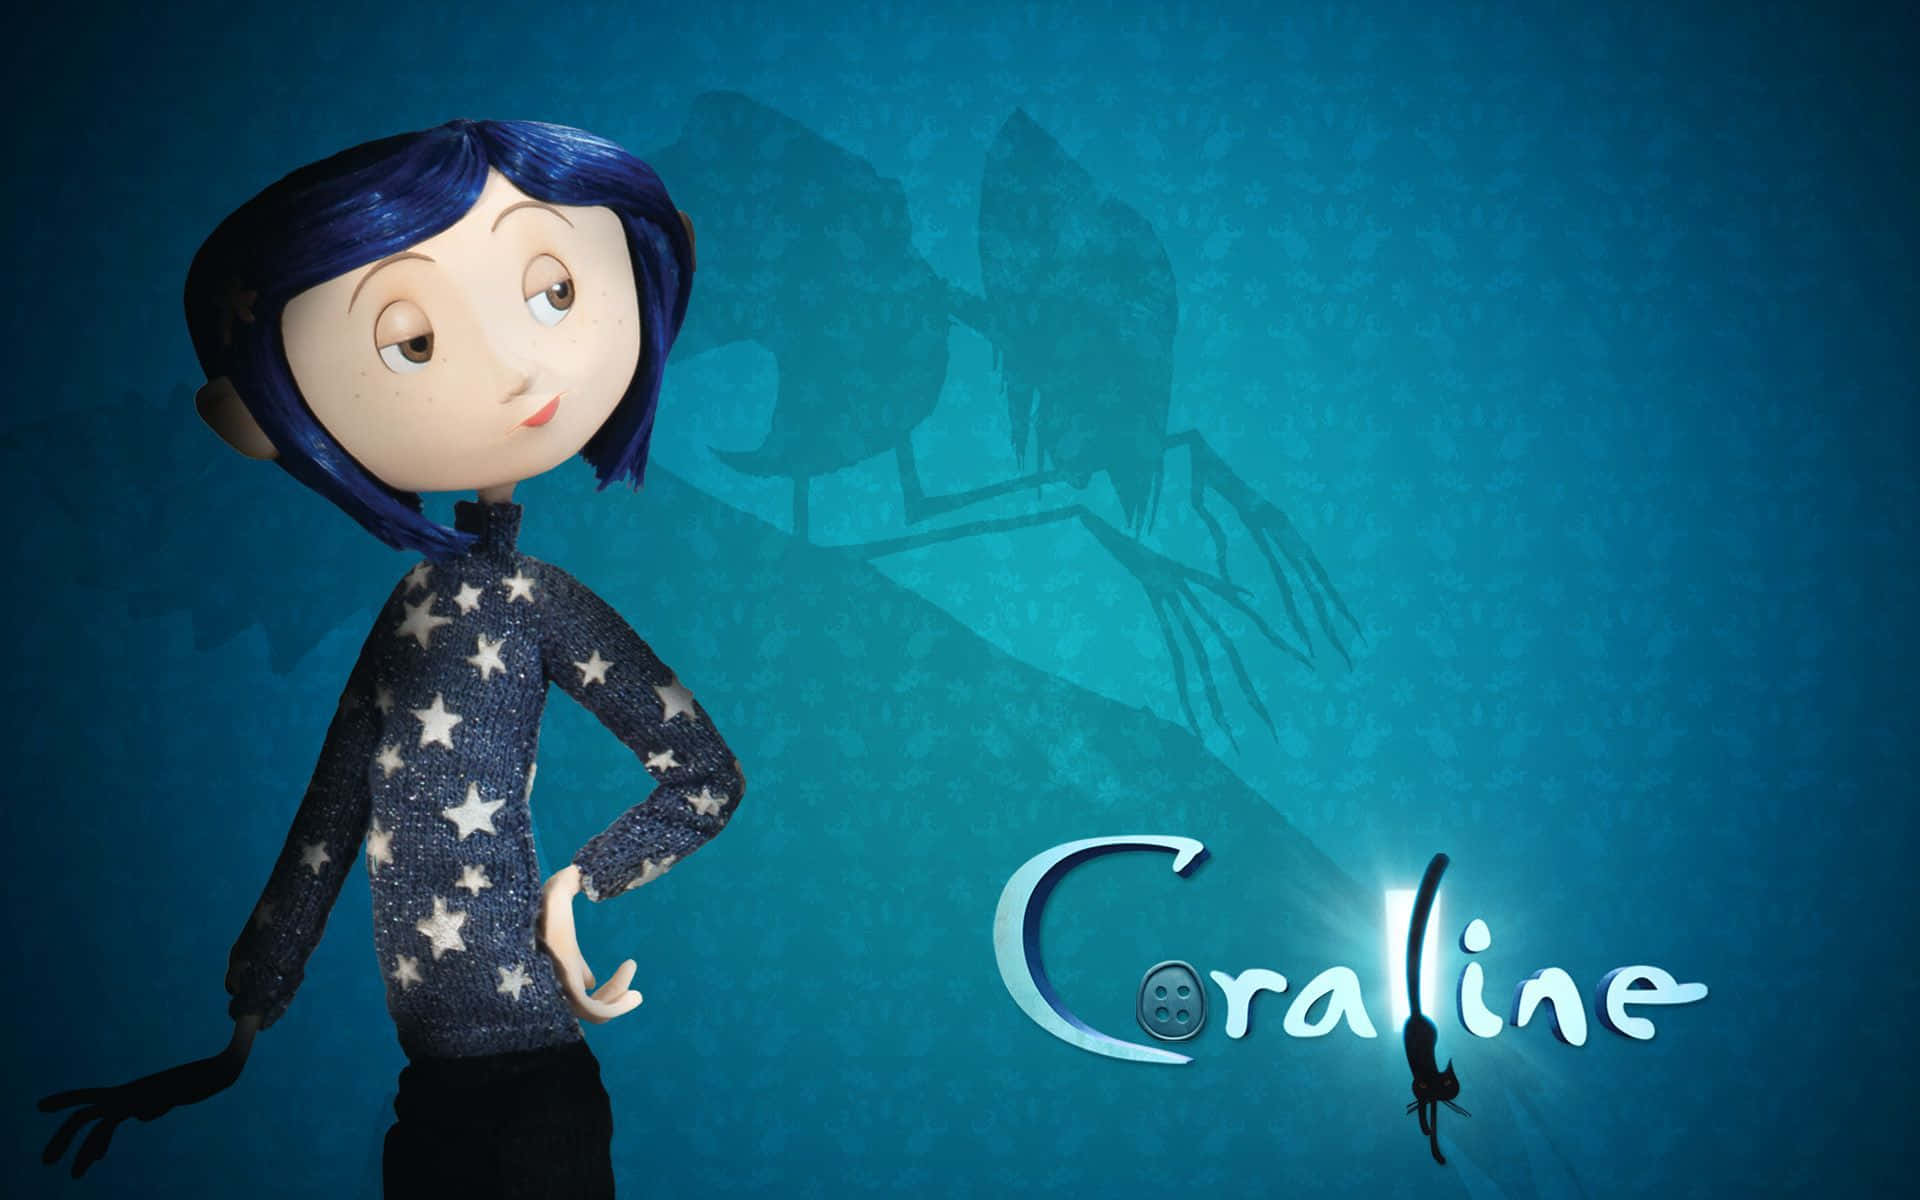 Young Coraline discovers a secret world